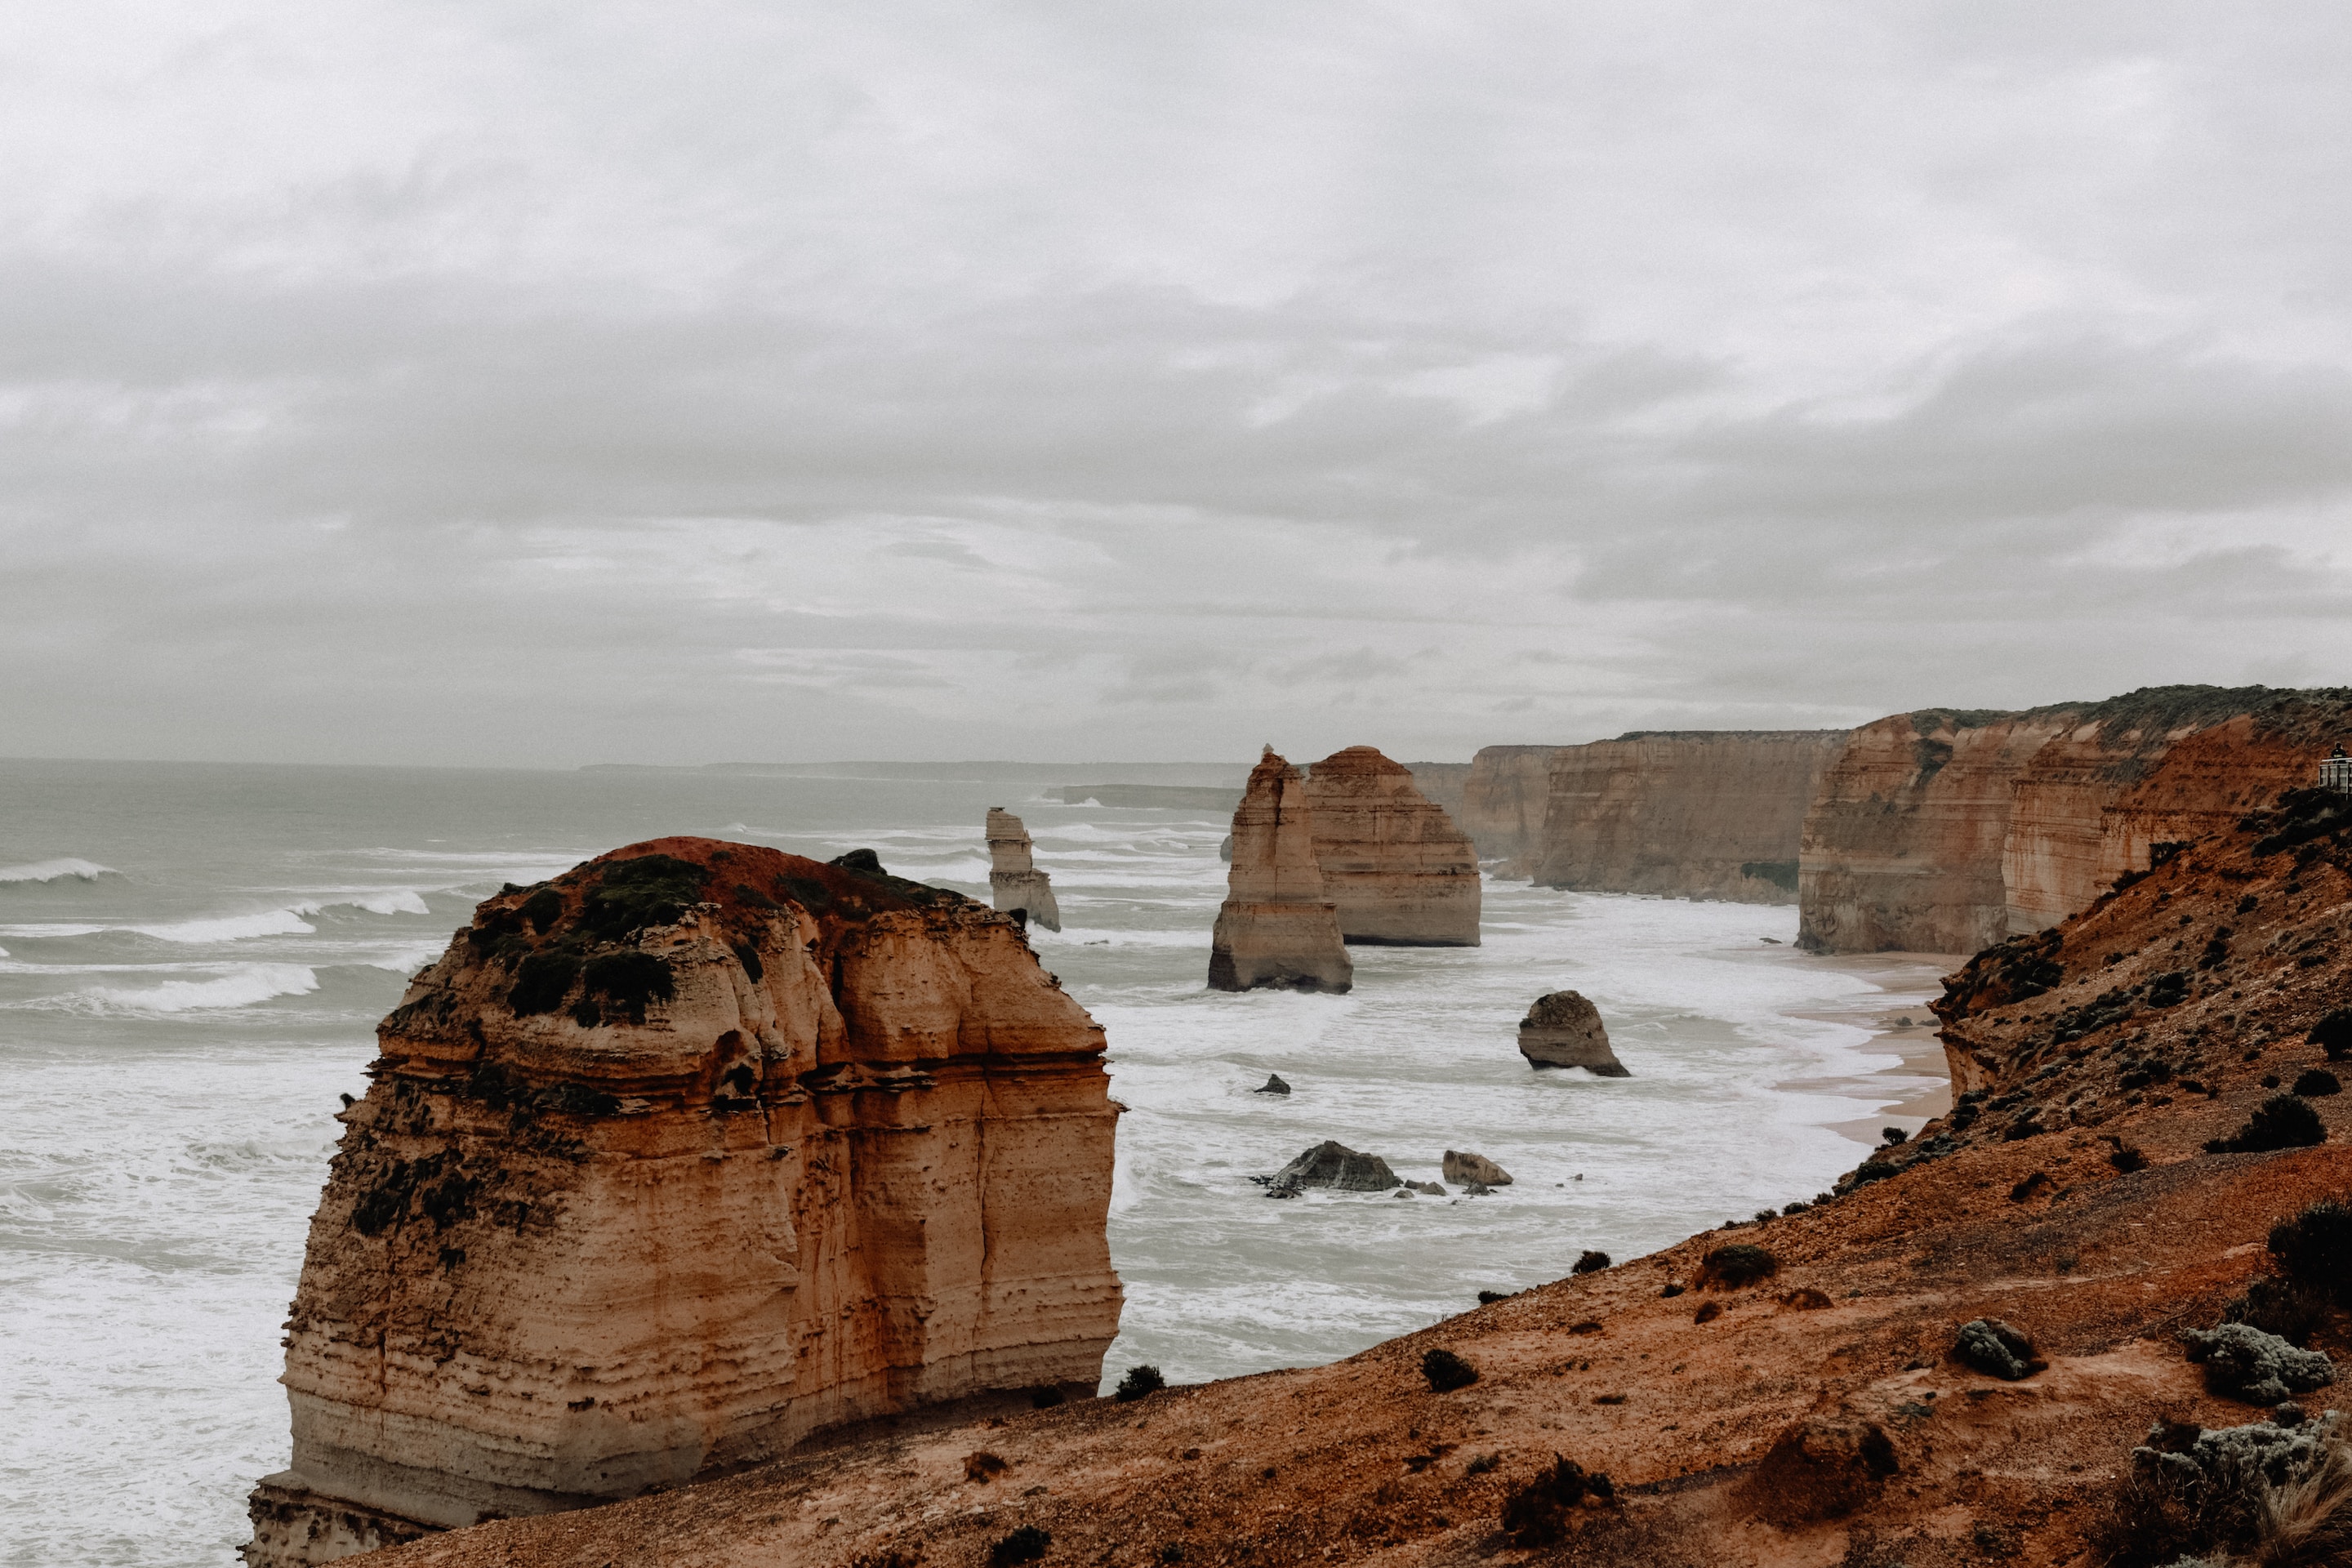 Is it better to stay at Apollo Bay or Port Campbell? Port Campbell